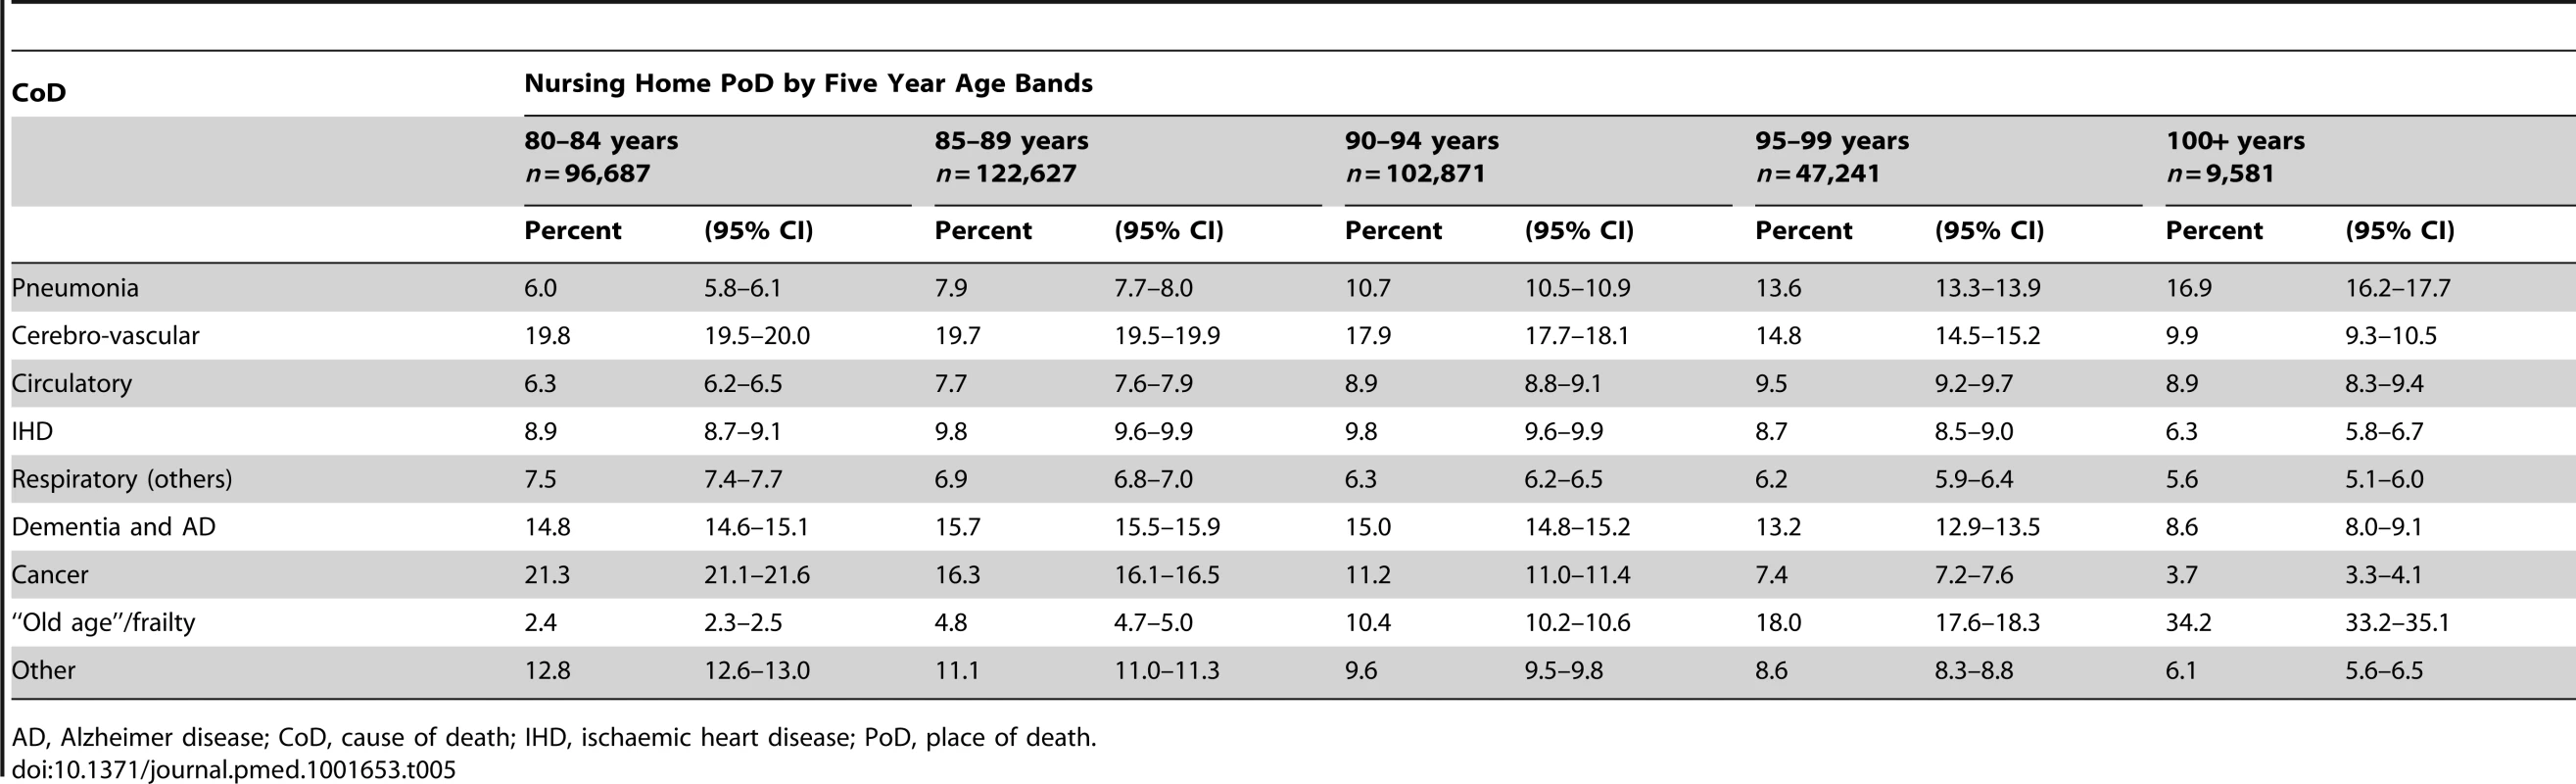 Cause of death by age bands and nursing home as place of death.